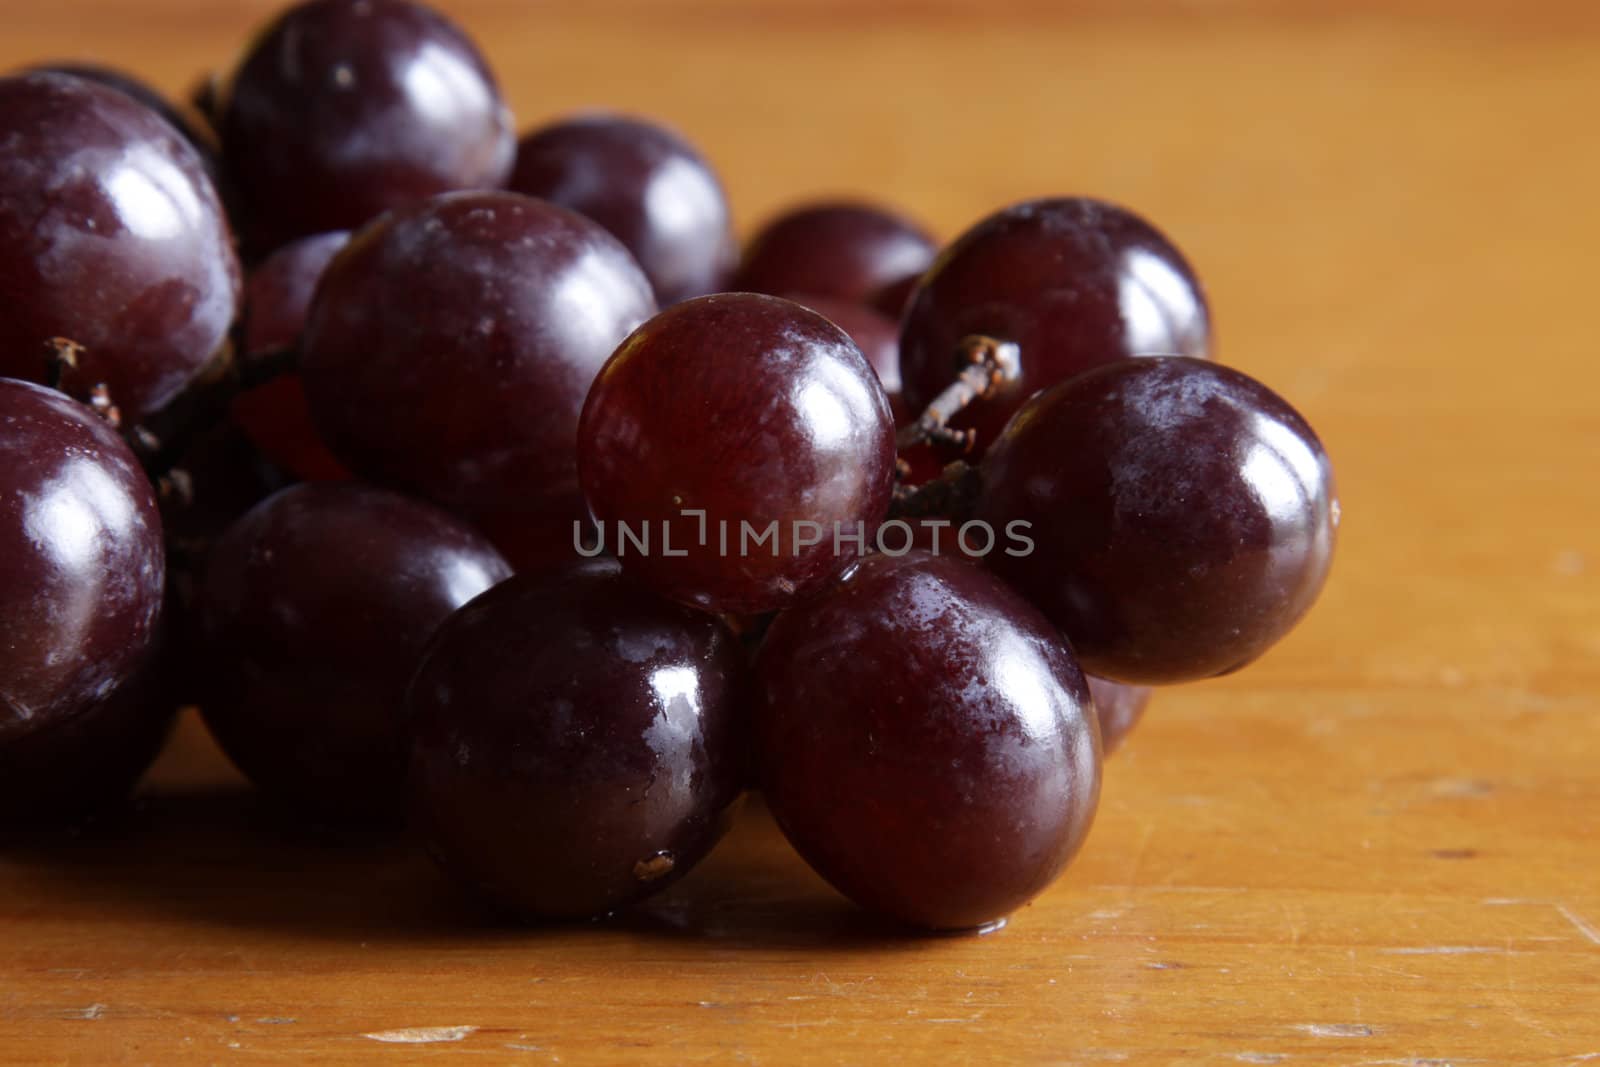 A cluster of juicy red grapes on a wood table.
